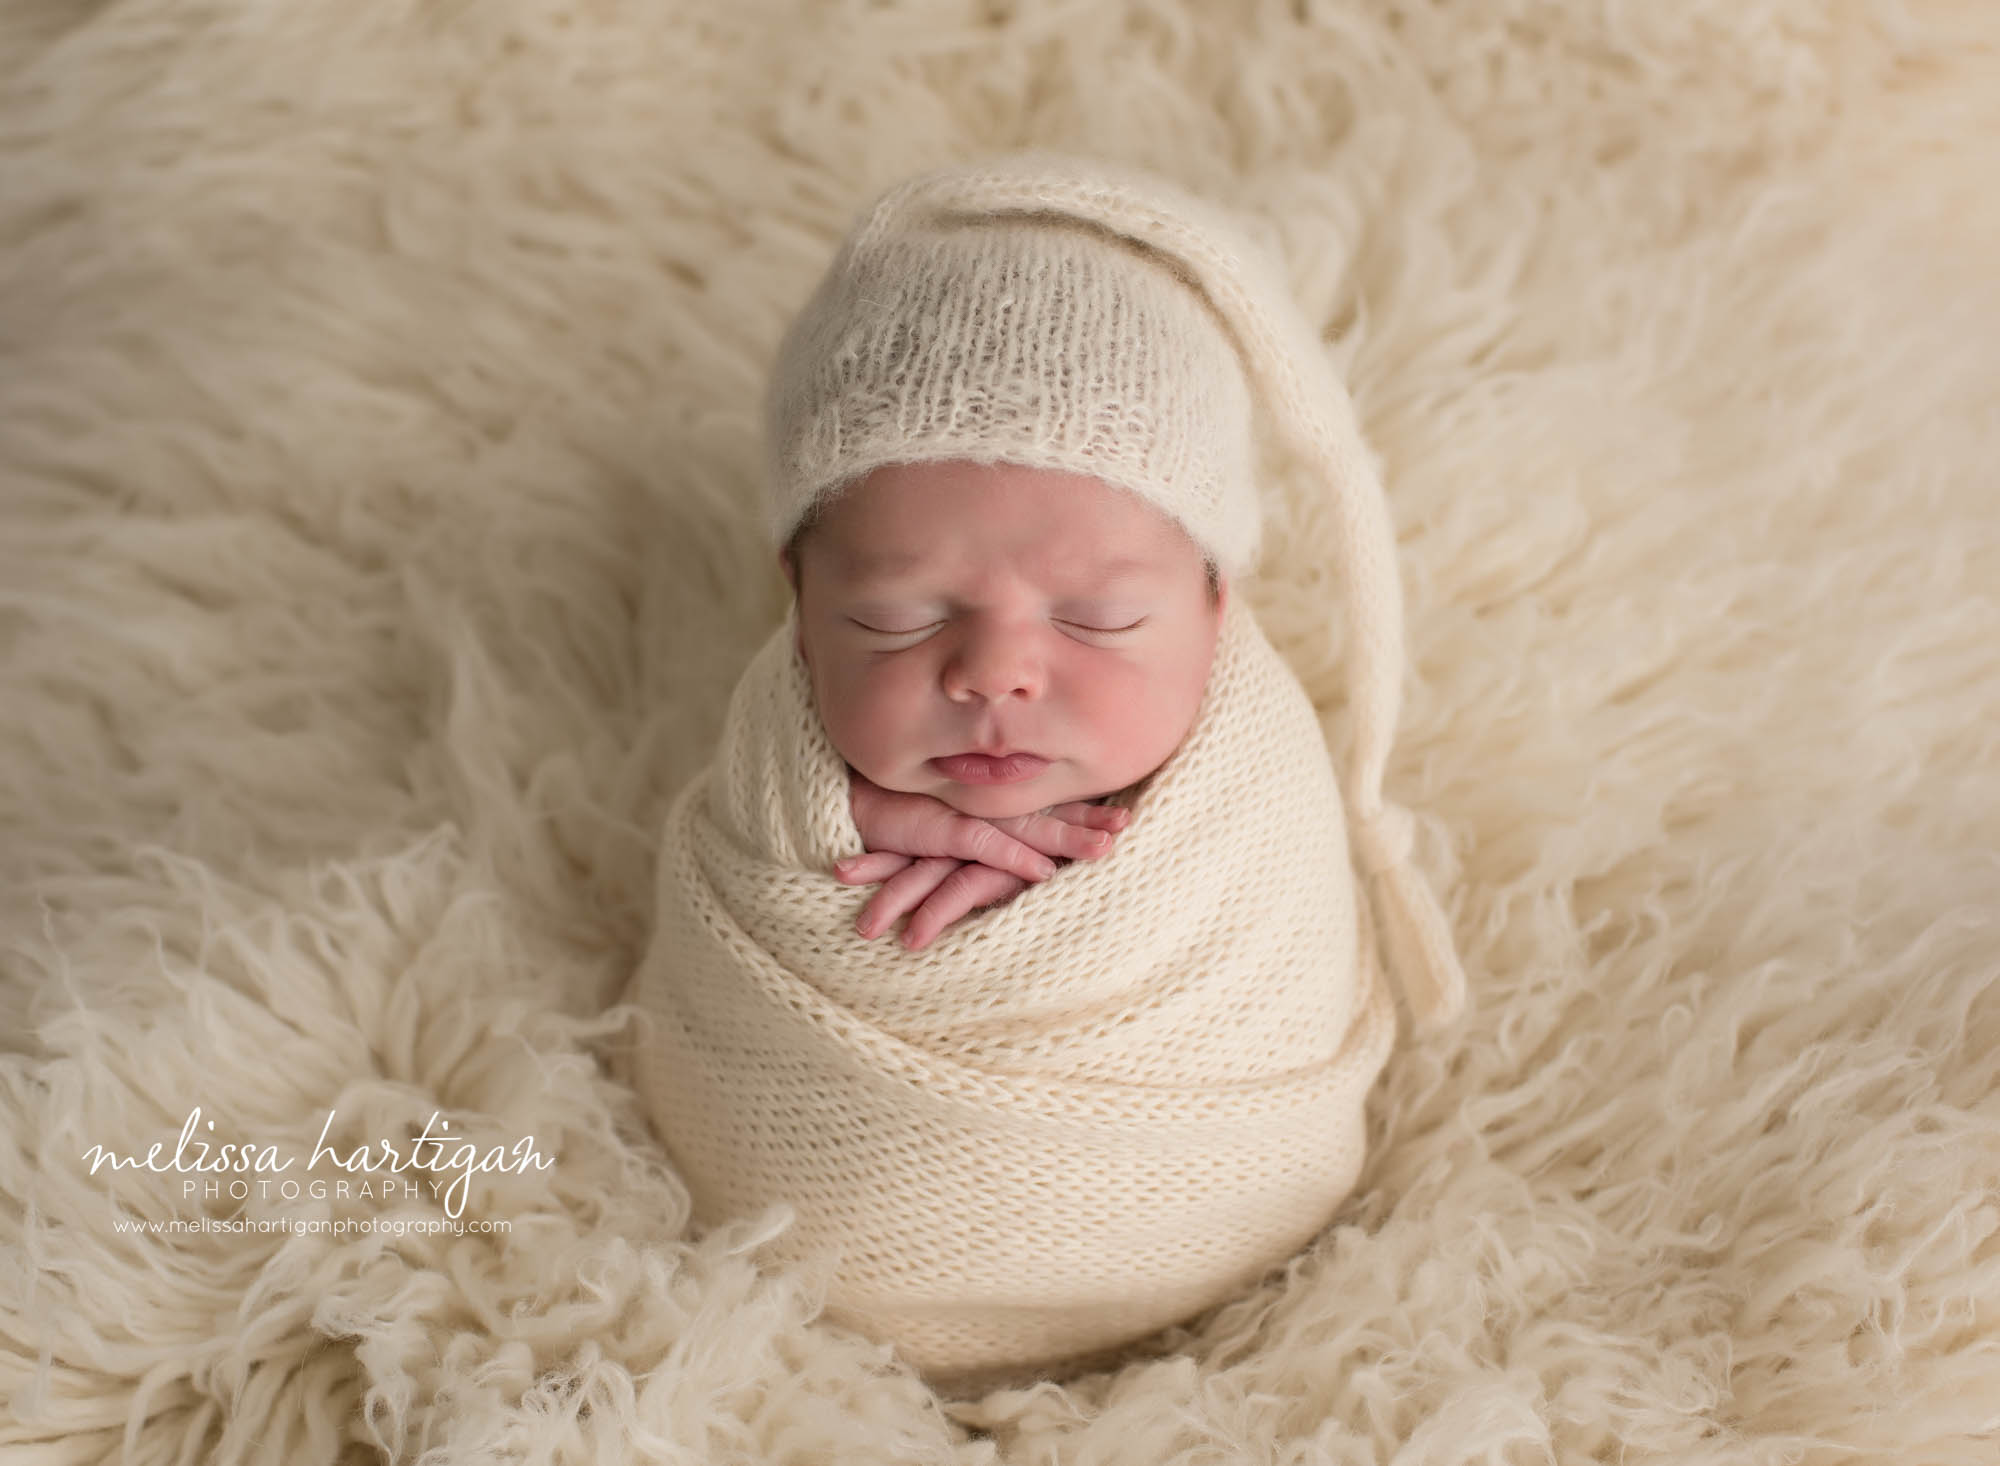 newborn baby boy wrapped in cream knitted wrap wearing knitted sleepy cap